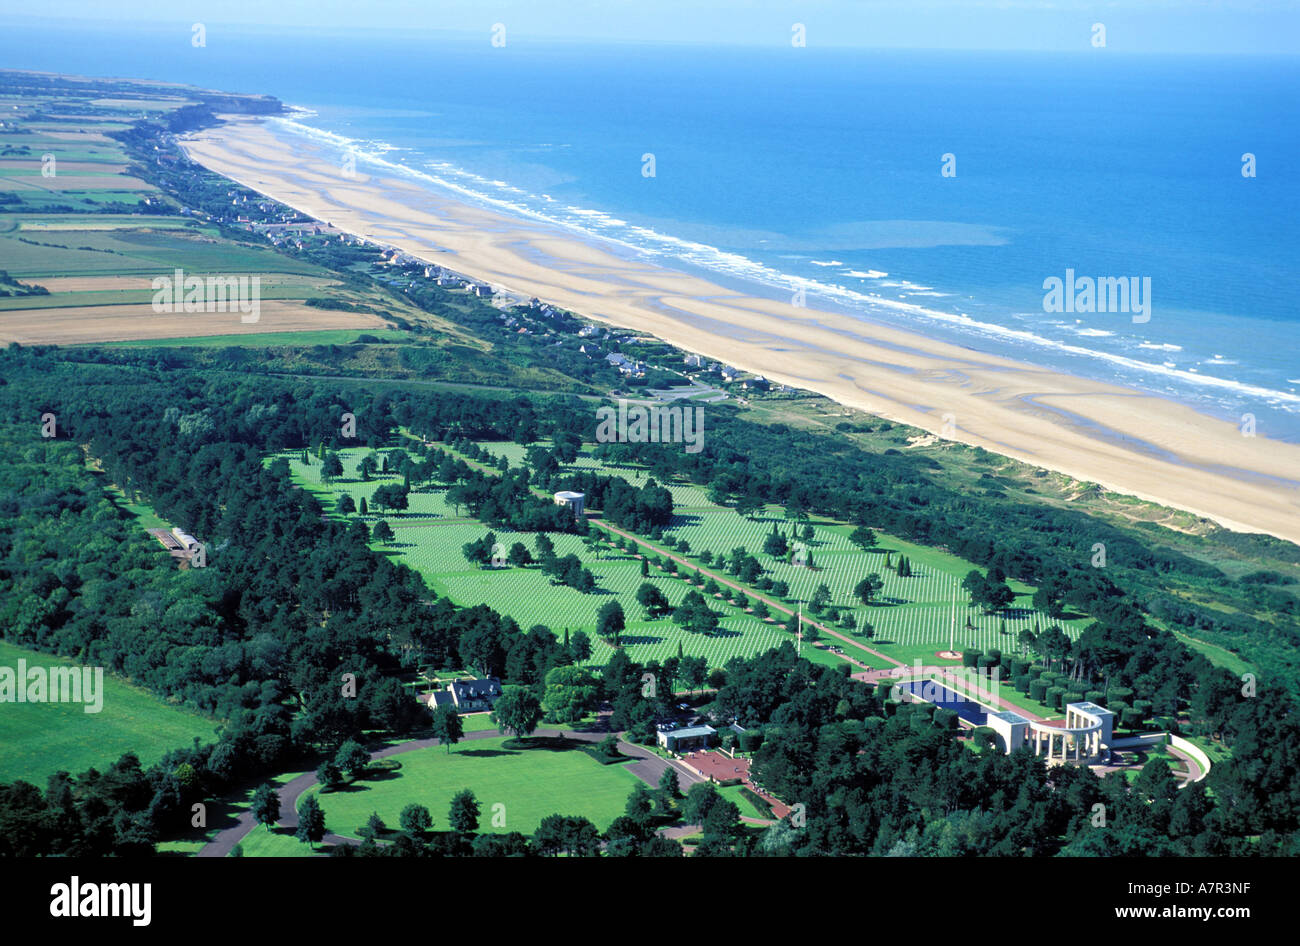 France, Calvados, Omaha beach, one of the beaches of the Normandy landings during the Second World War (aerial view) Stock Photo